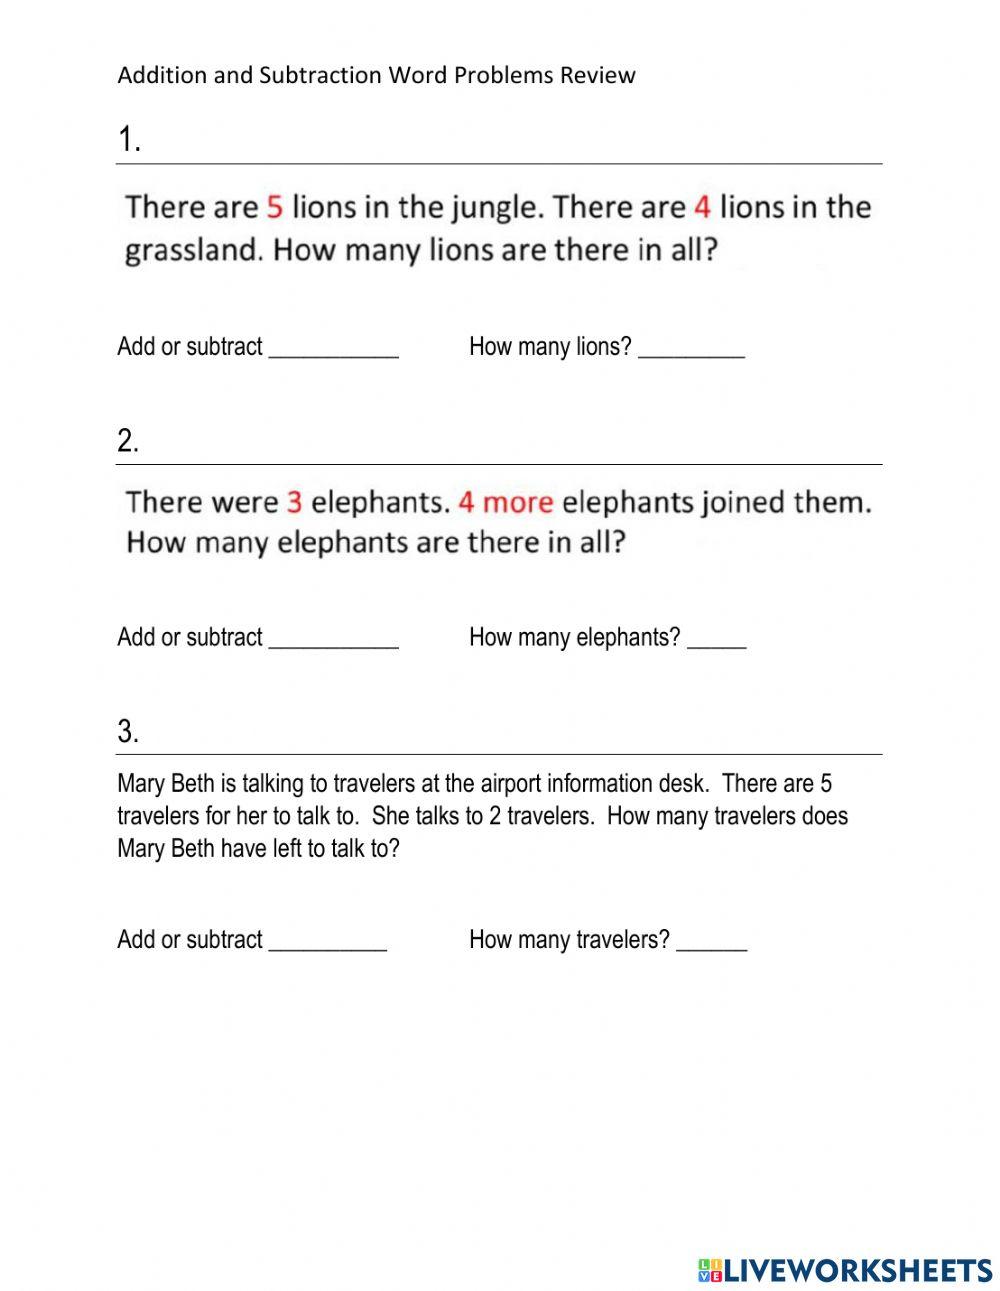 Add and Subtract word problems worksheet review